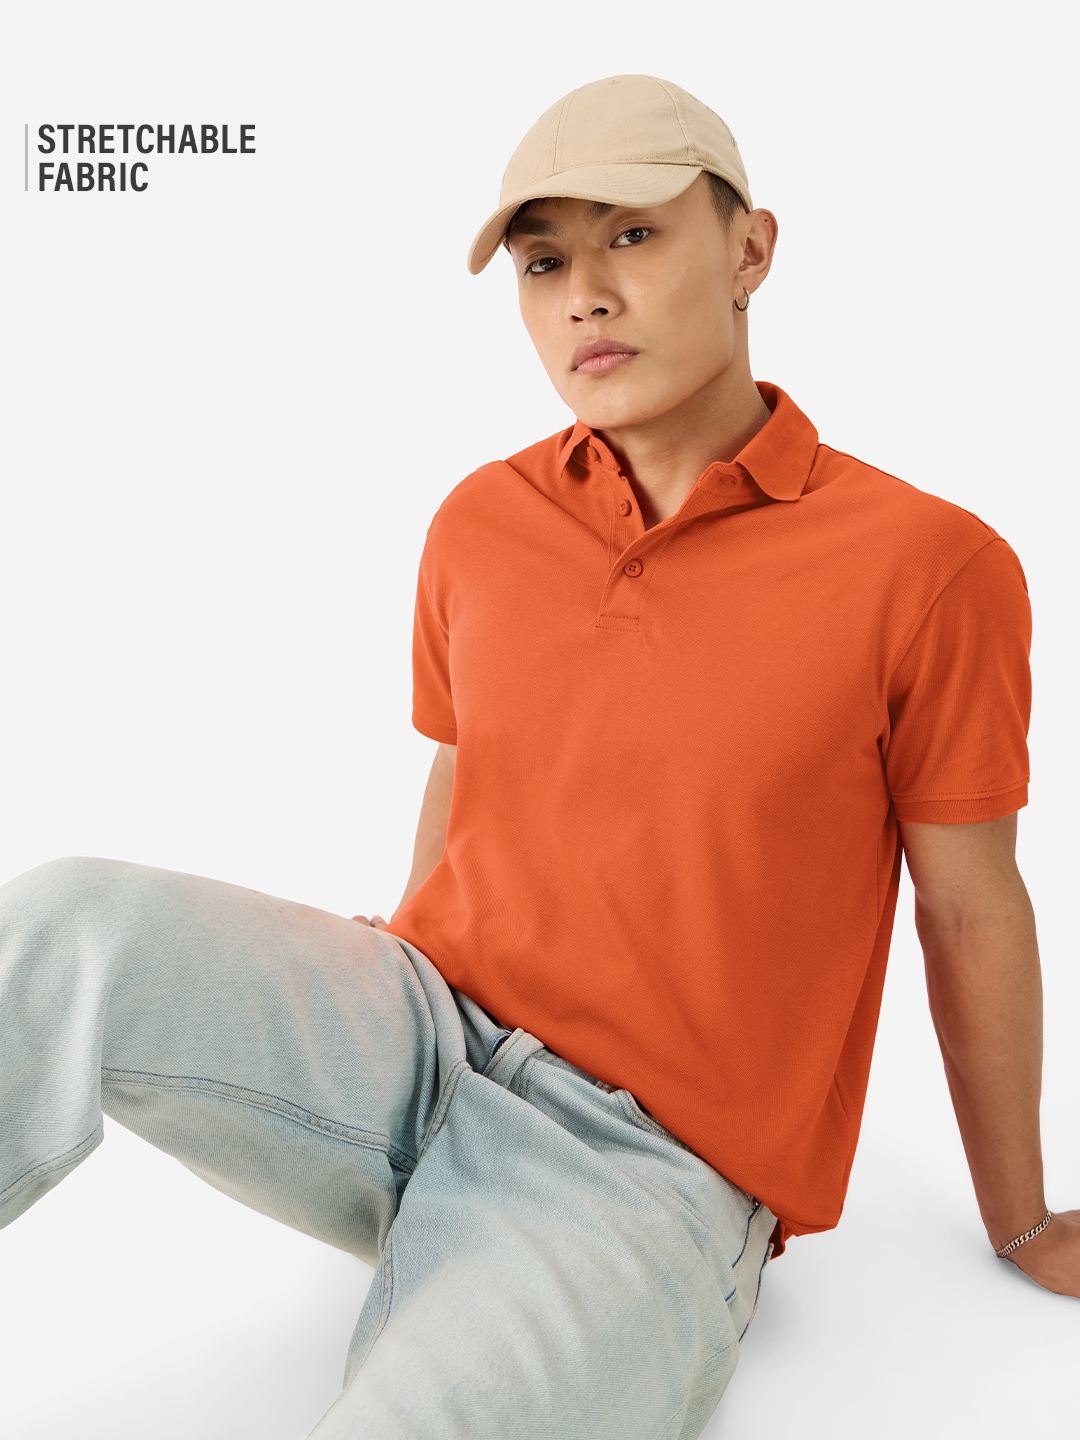 The Souled Store | Men's Solids: Tangerine Polo T-Shirt